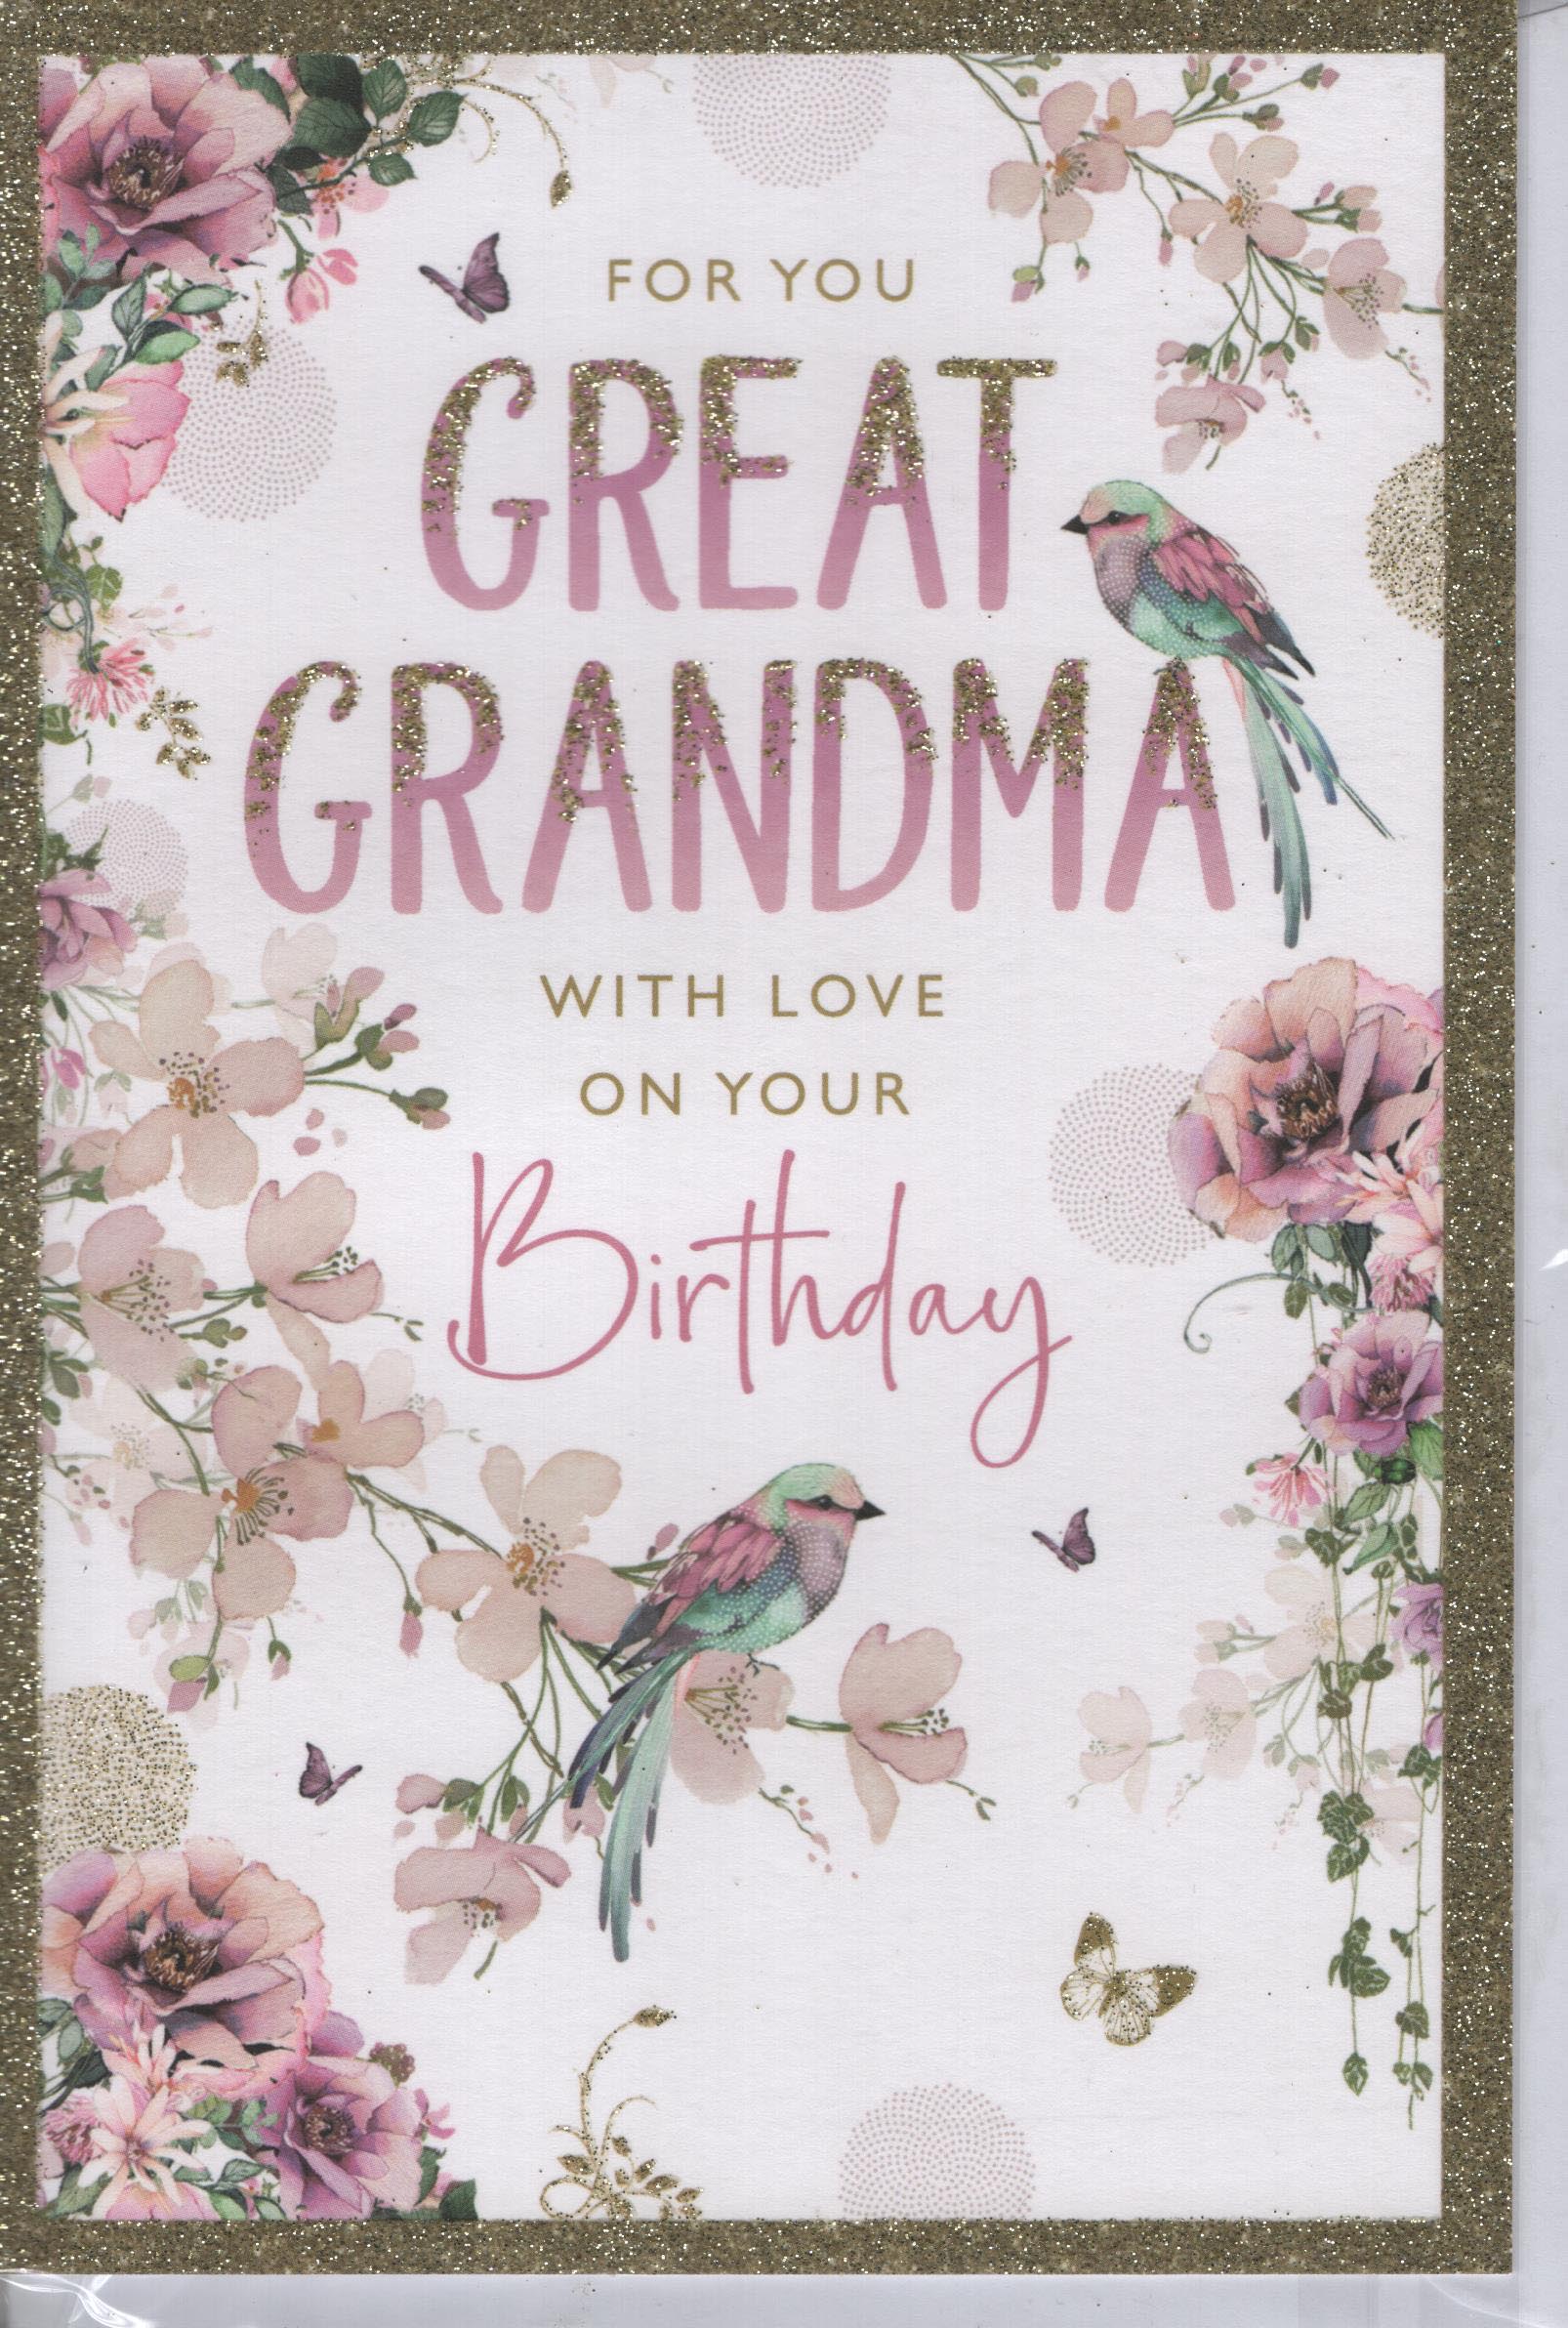 For You Great Grandma With Love On Your Birthday